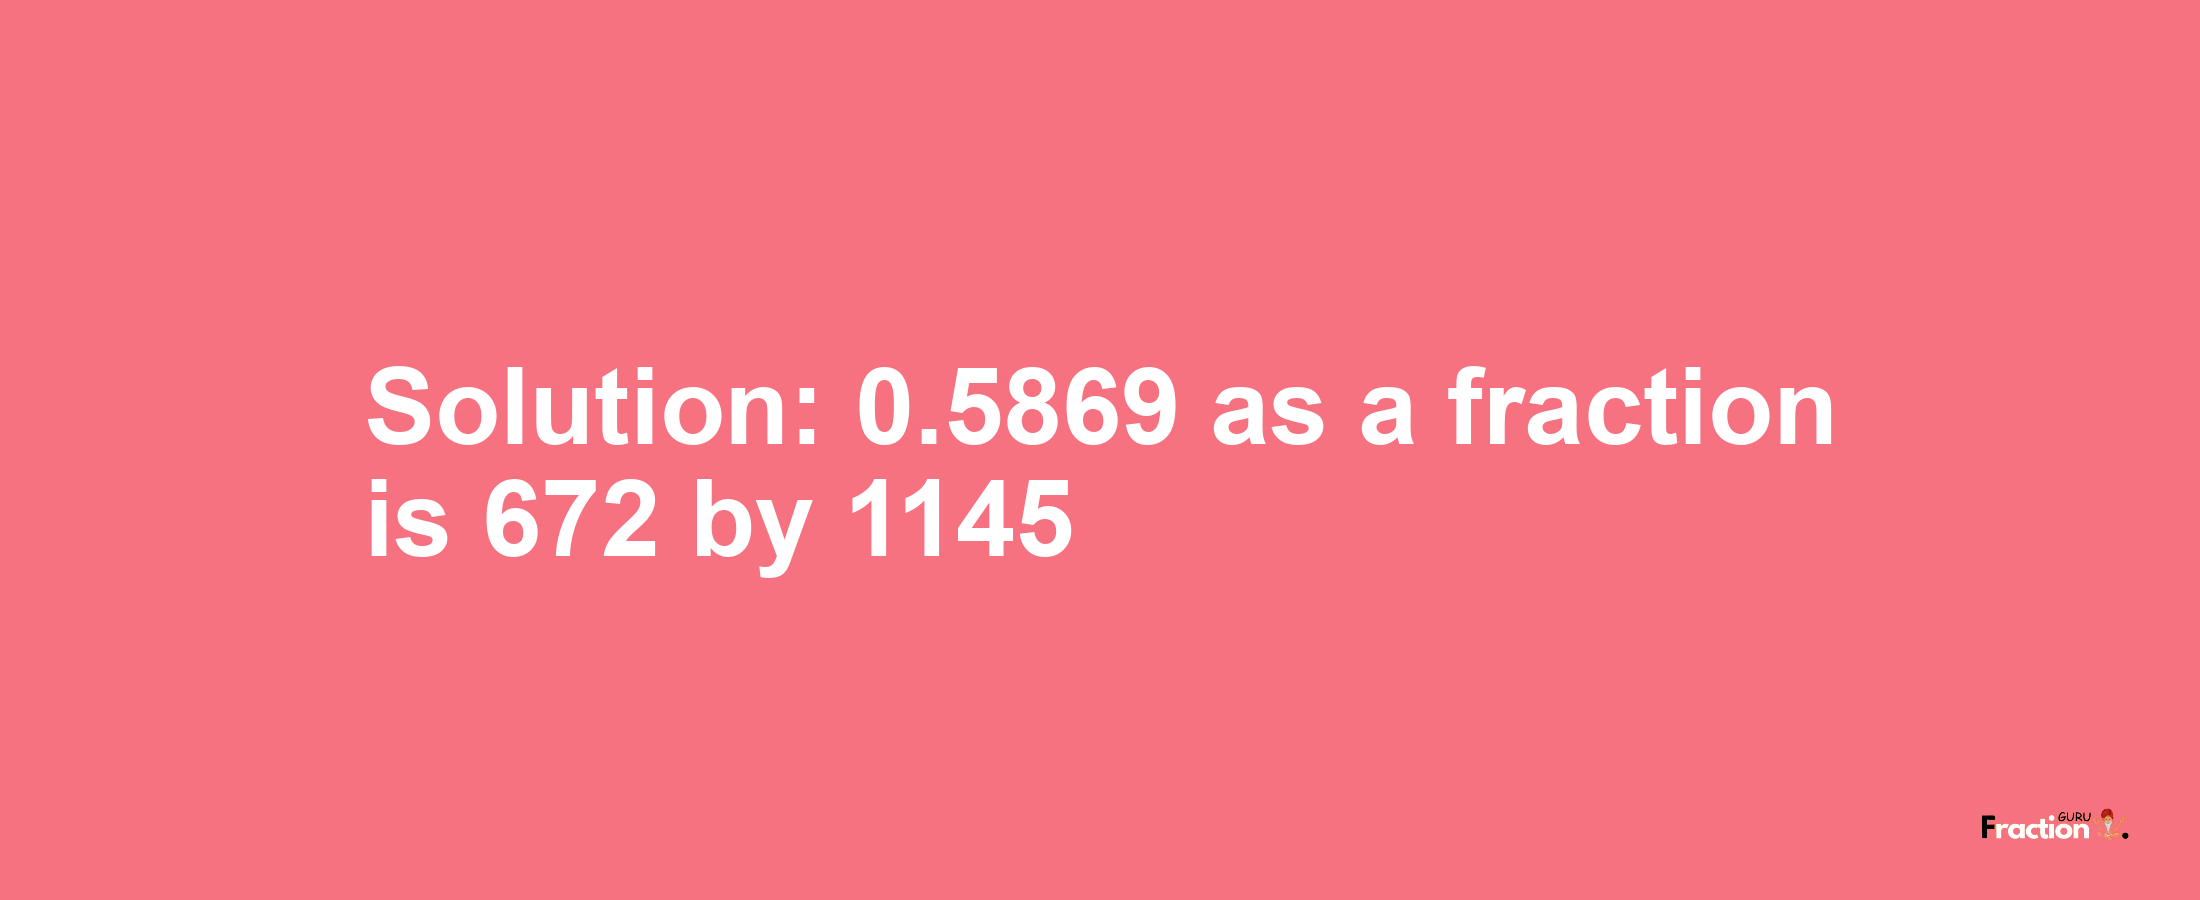 Solution:0.5869 as a fraction is 672/1145